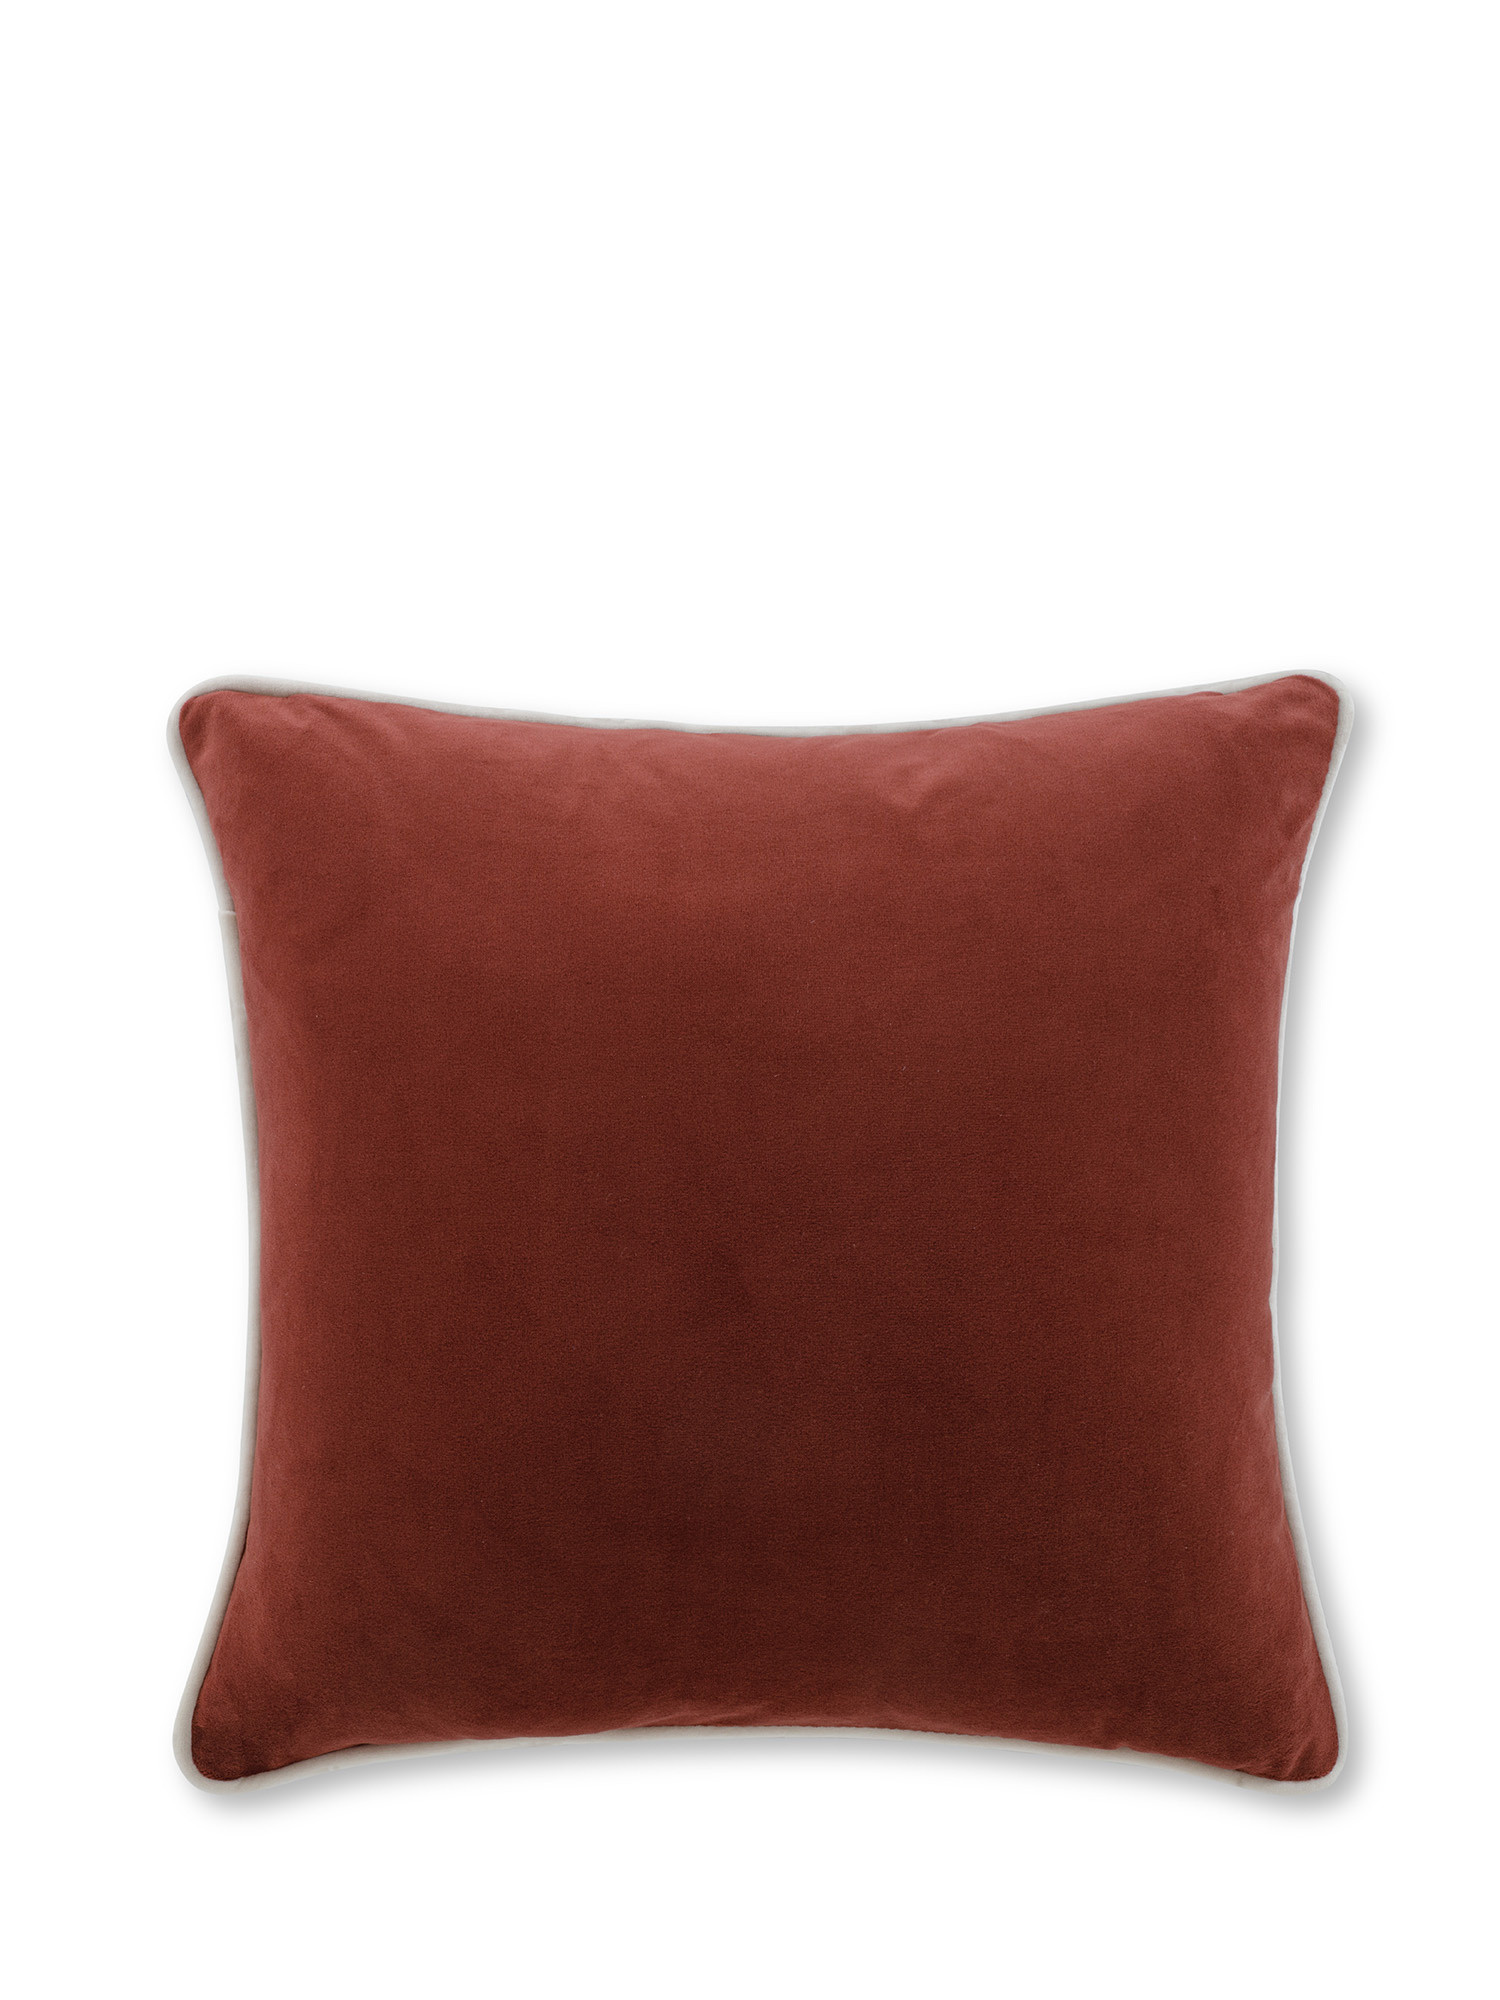 Velvet cushion with piping applied on the edge 45x45 cm, Brown, large image number 0